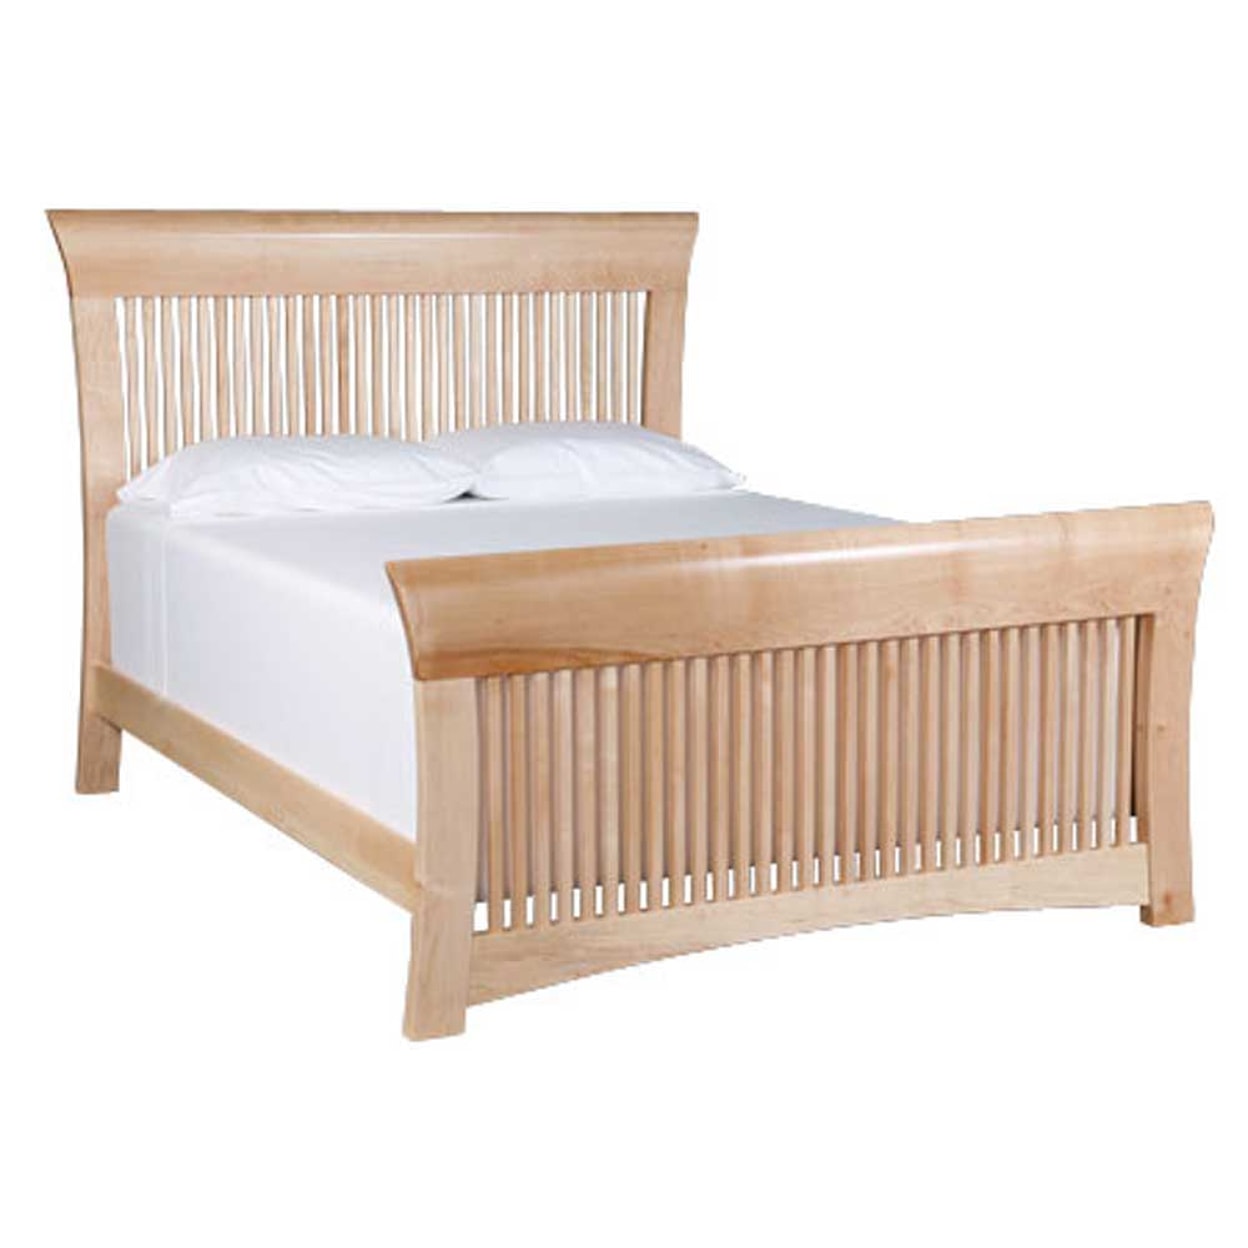 Simply Amish Loft Queen Spindle Bed